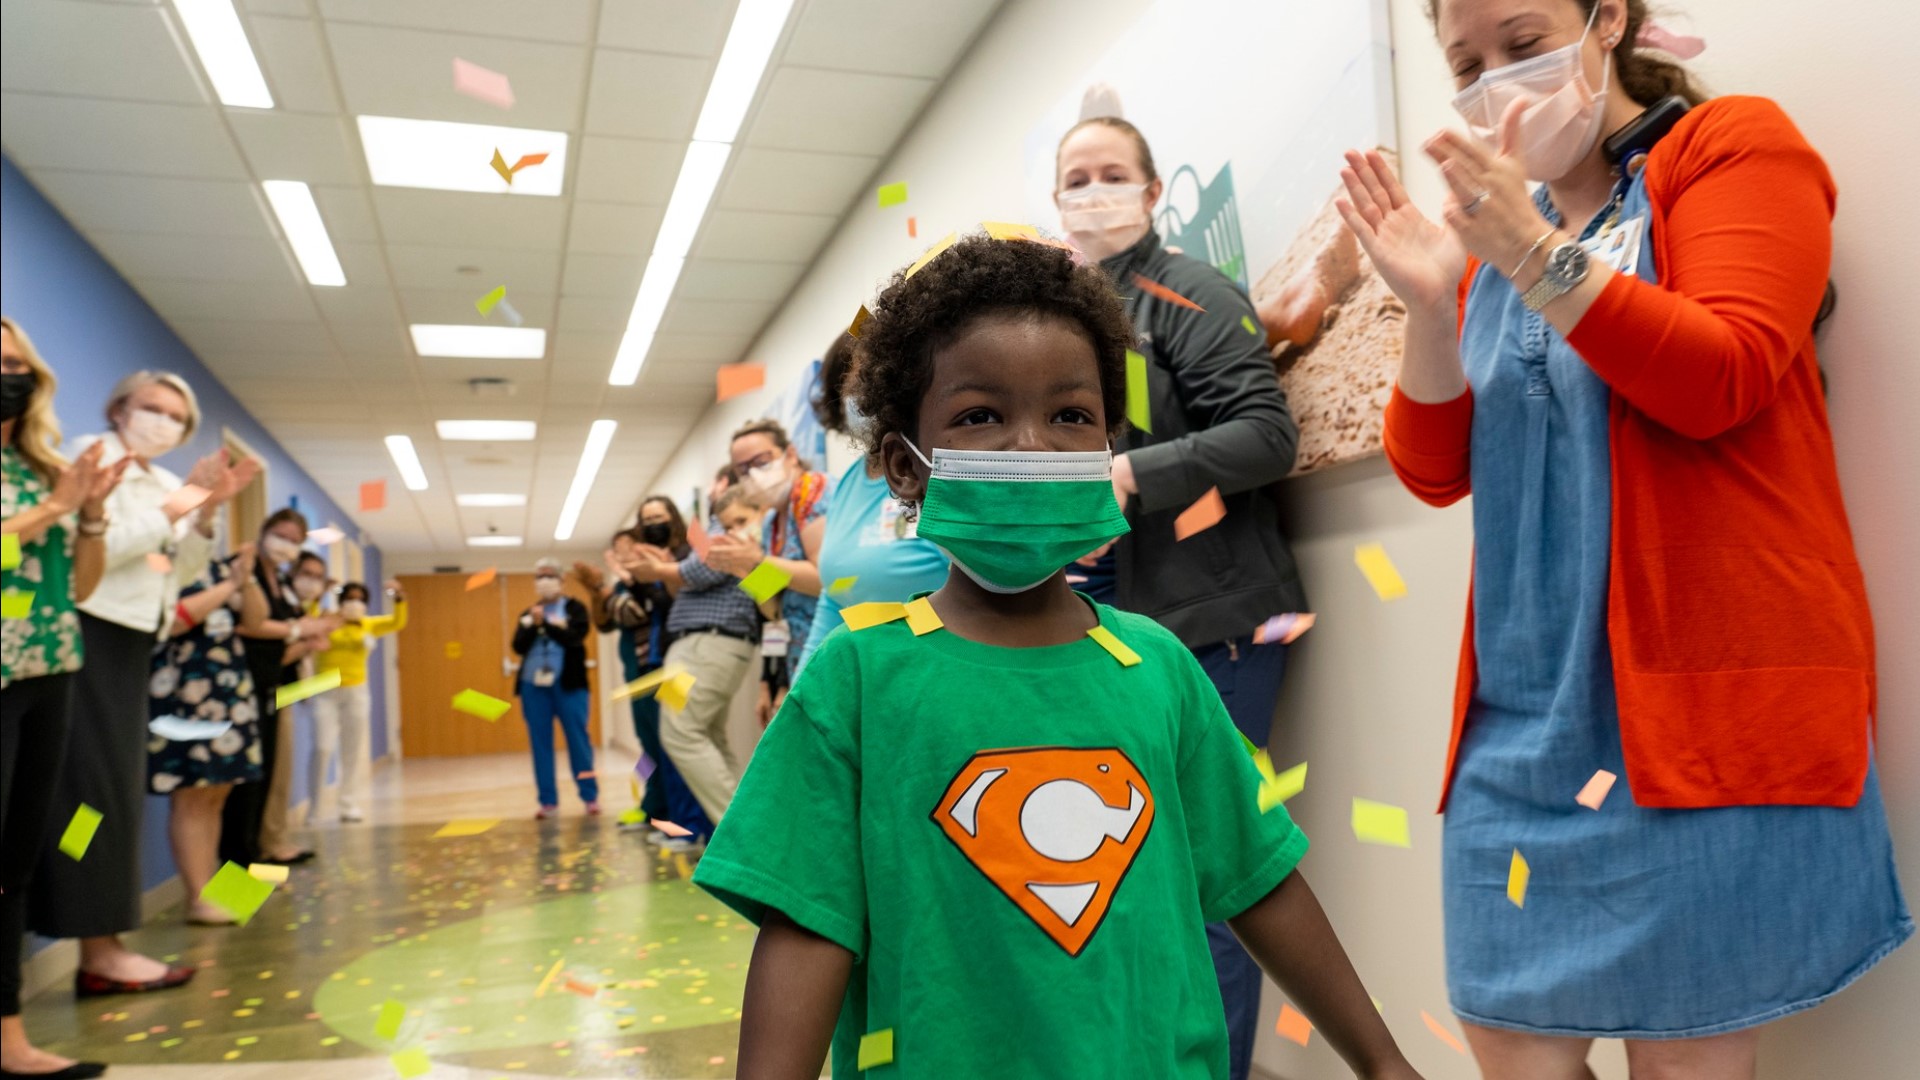 The Norfolk hospital shared pictures of Cayden Addison walking down the hallway while the staff cheered him on during a big celebration.